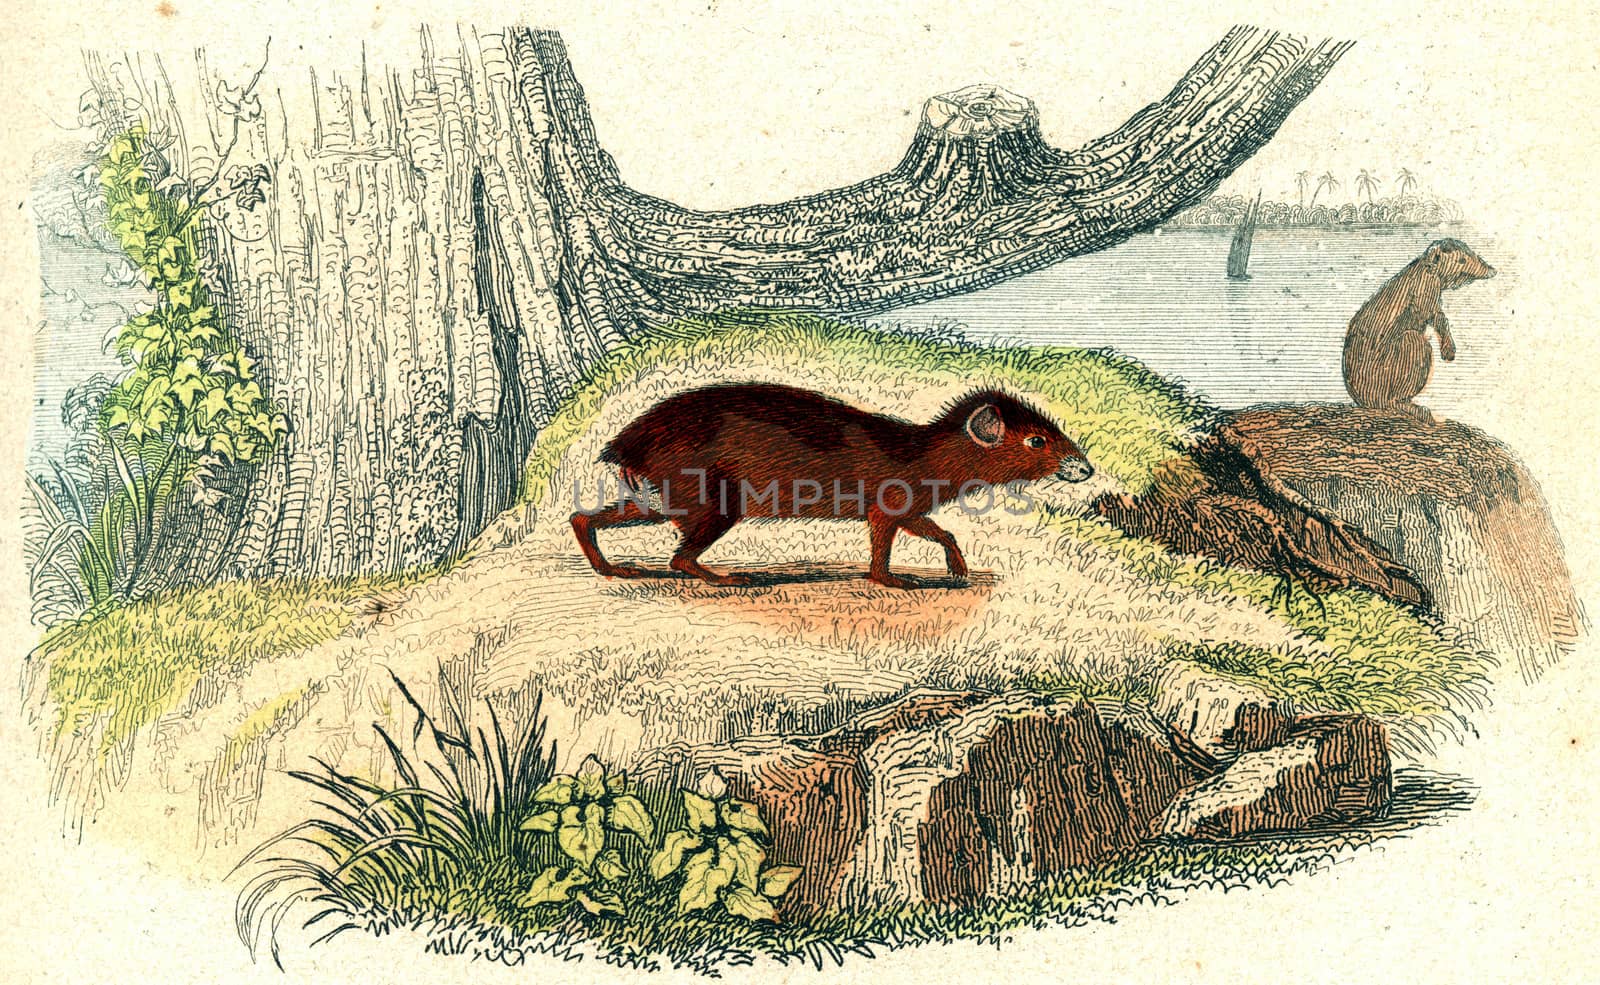 The agouti, vintage engraving. by Morphart